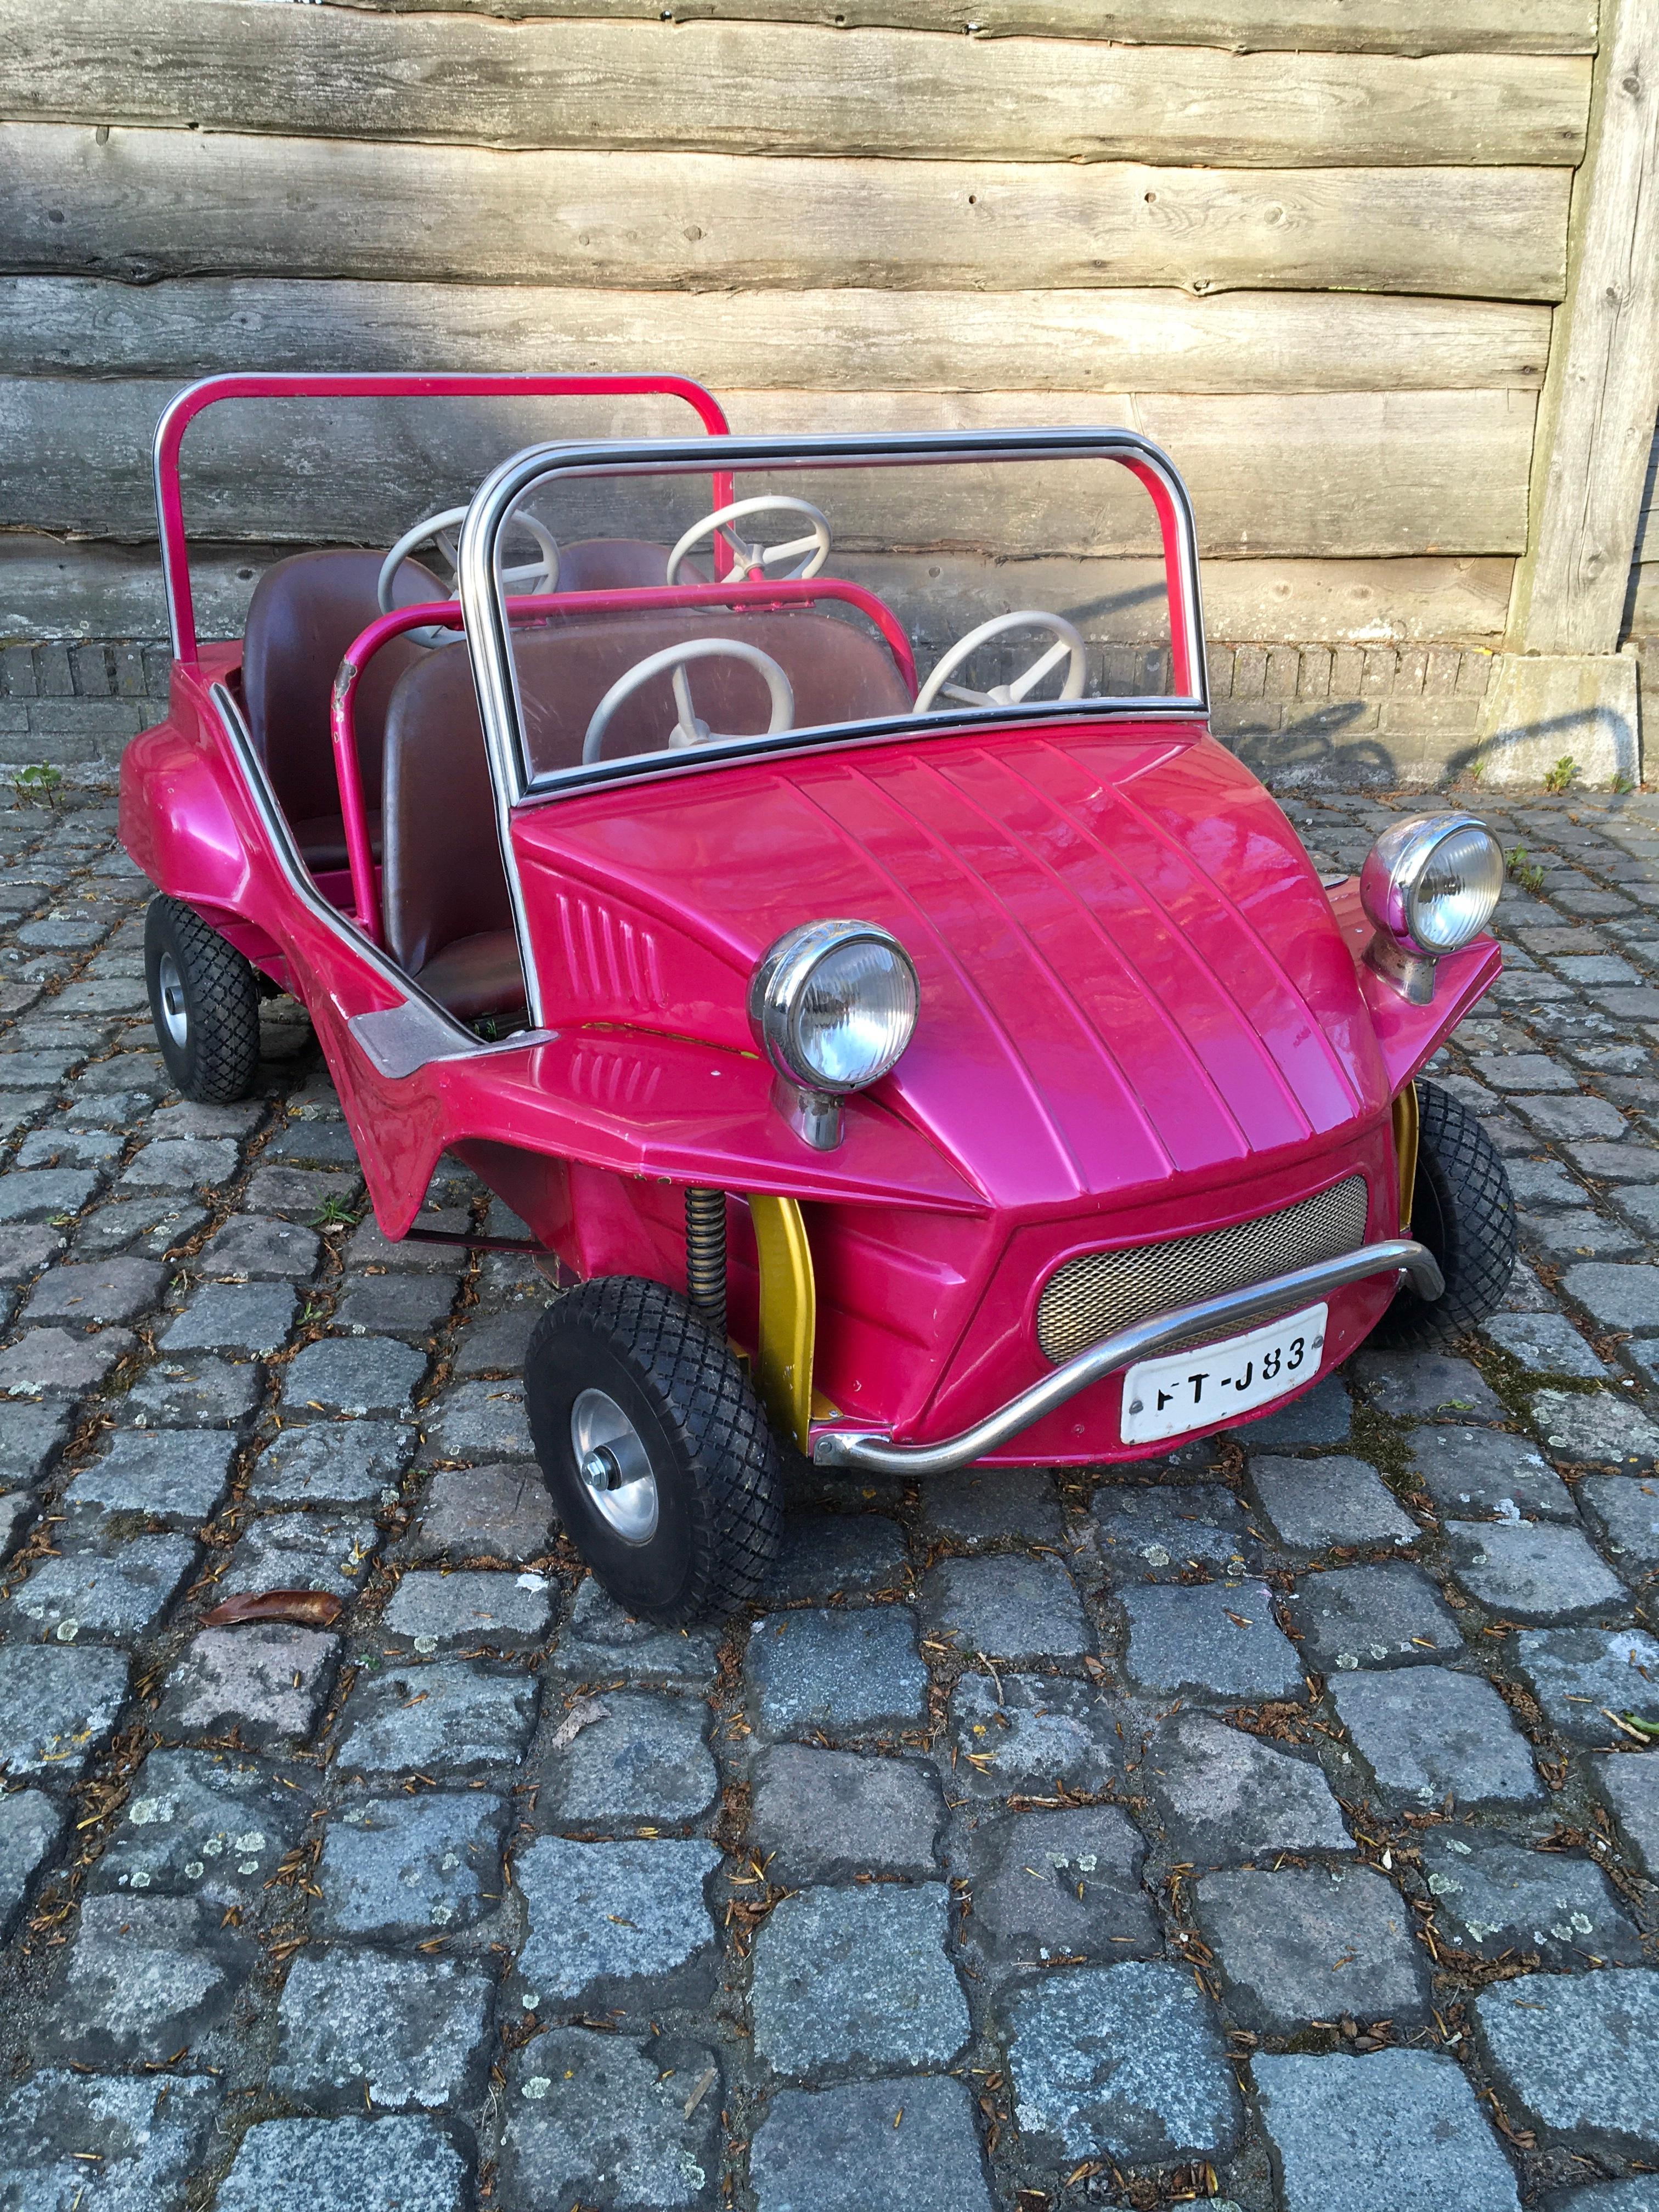 Pink Carousel Buggy Car by L’Autopède Belgium. 
Looks like a real vintage VW beach buggy car. 

This sheet metal carnival ride car with 4 seats dates from the 1970s. 
It's a handmade piece - so a real piece of art and craftmanship. 
In bright color